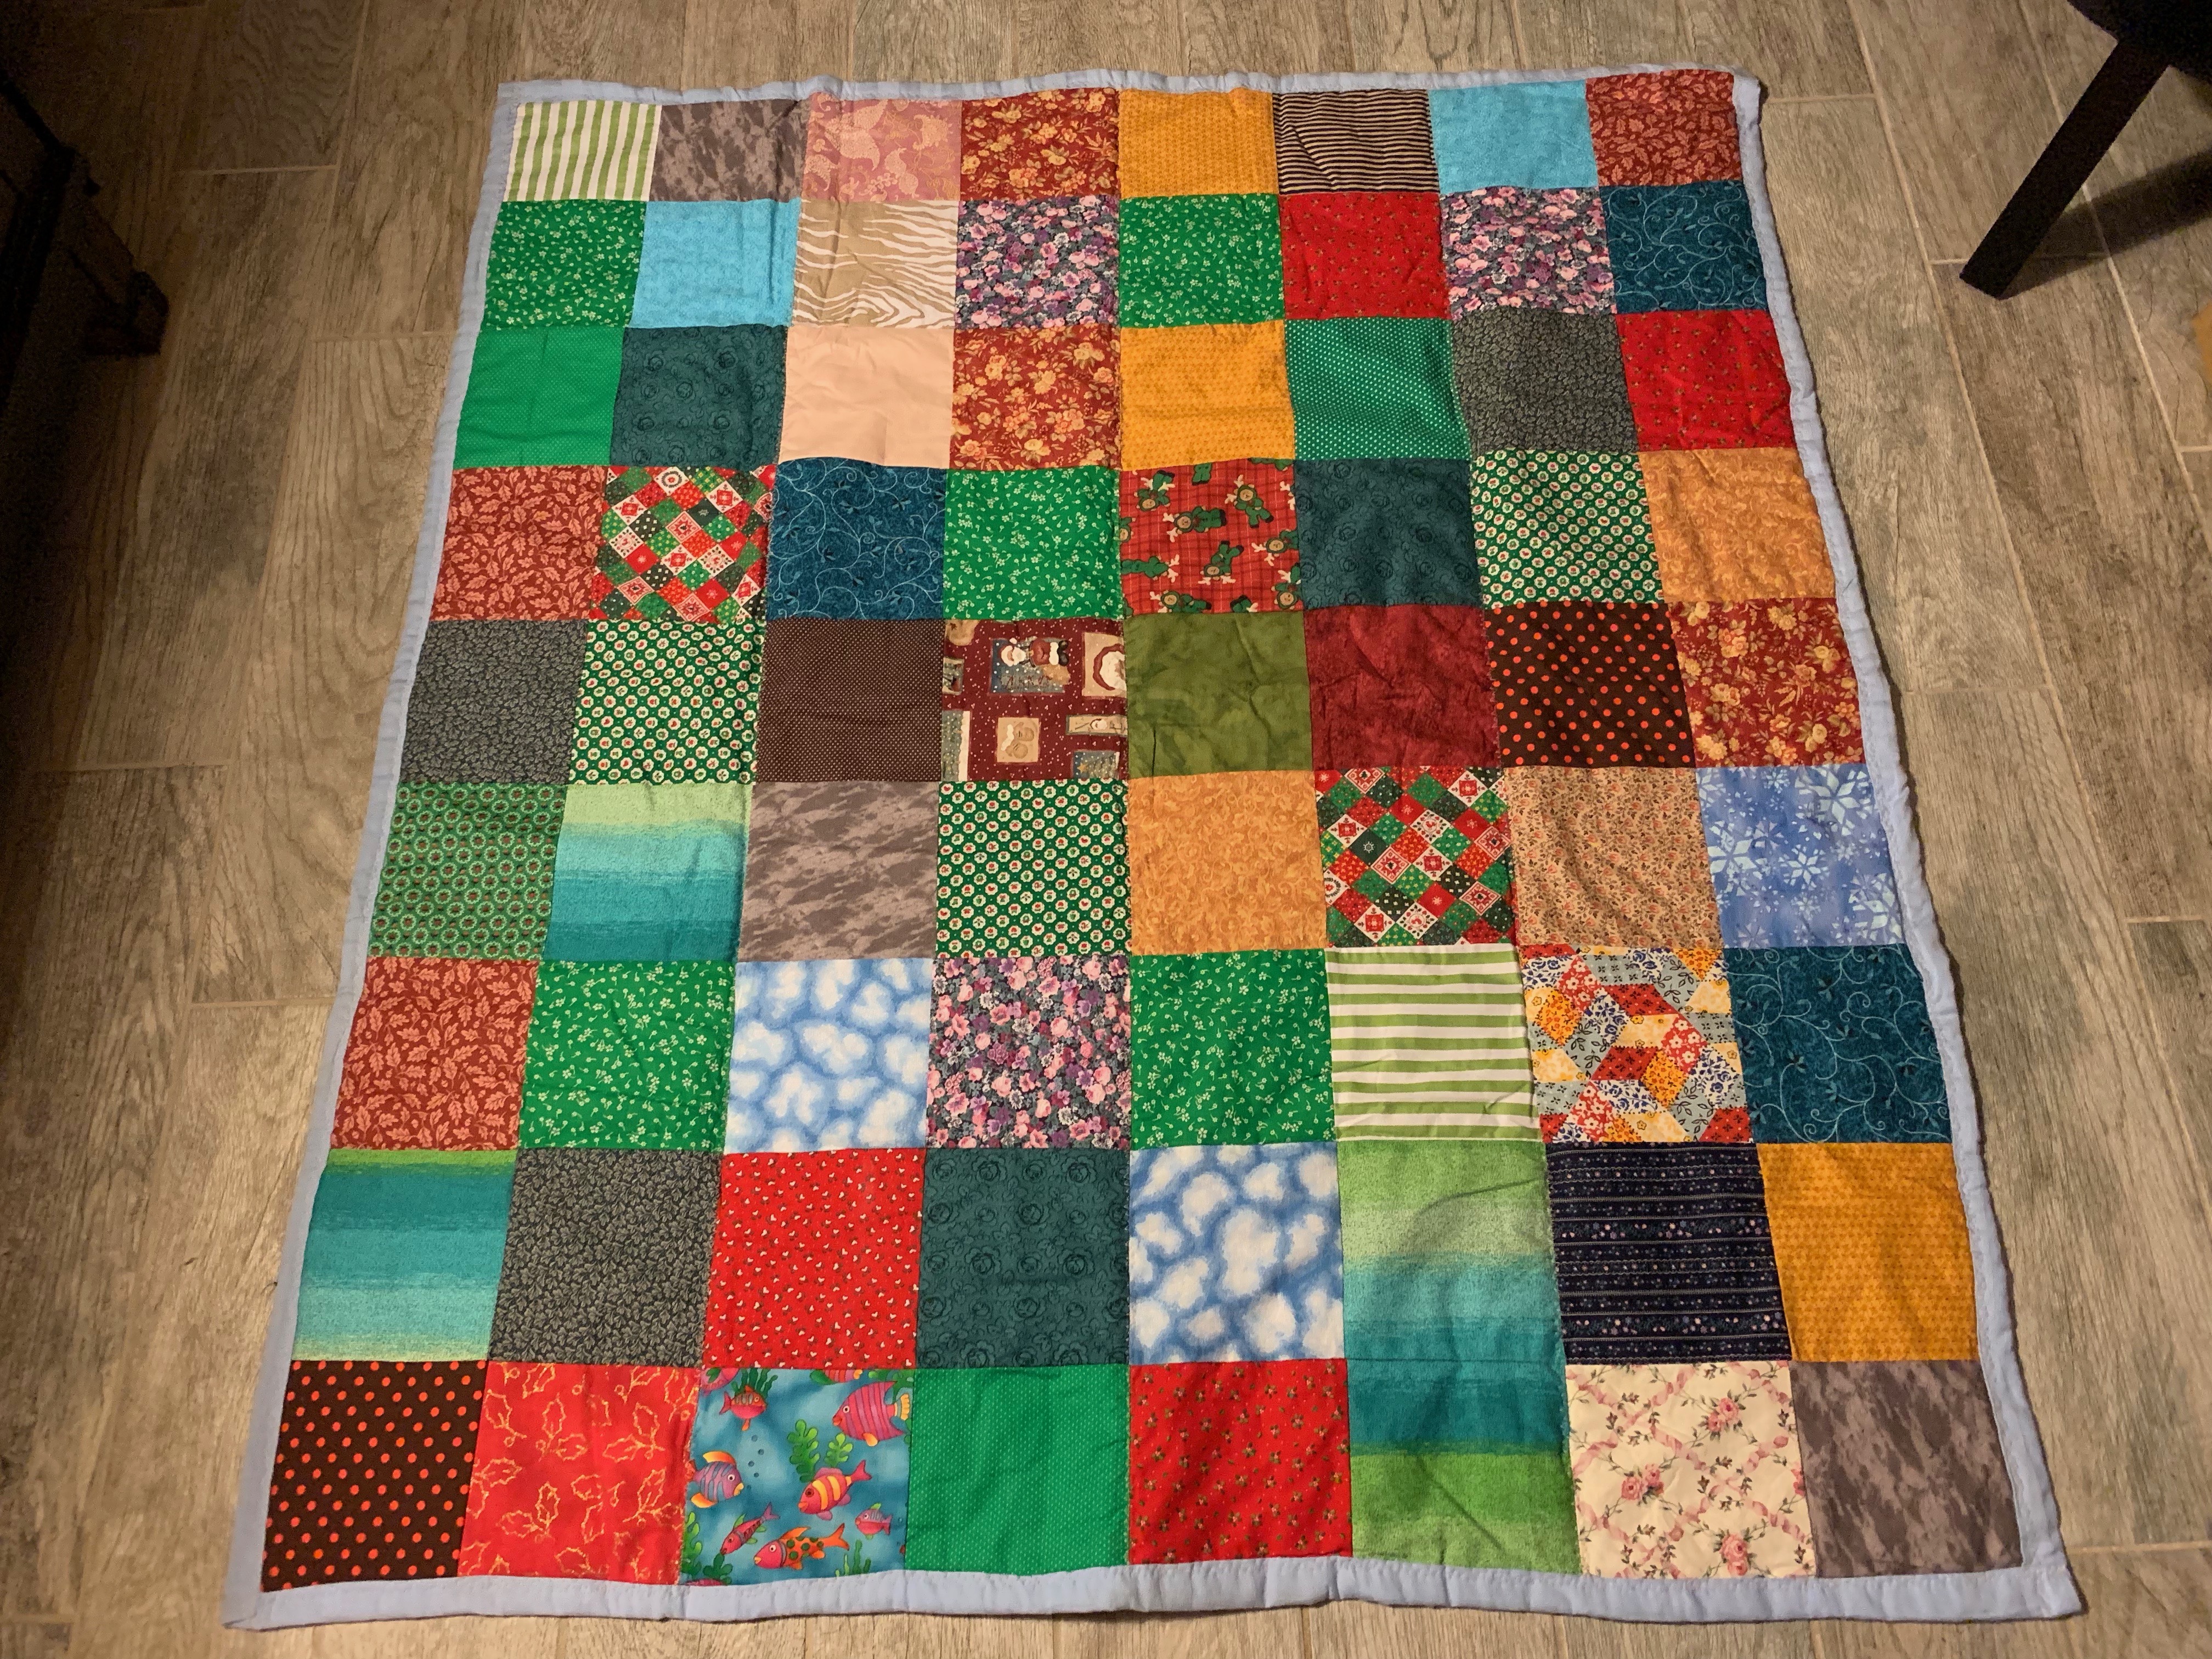 1986 Hand-Stitched Whimsical Cotton Patchwork Quilt (46\